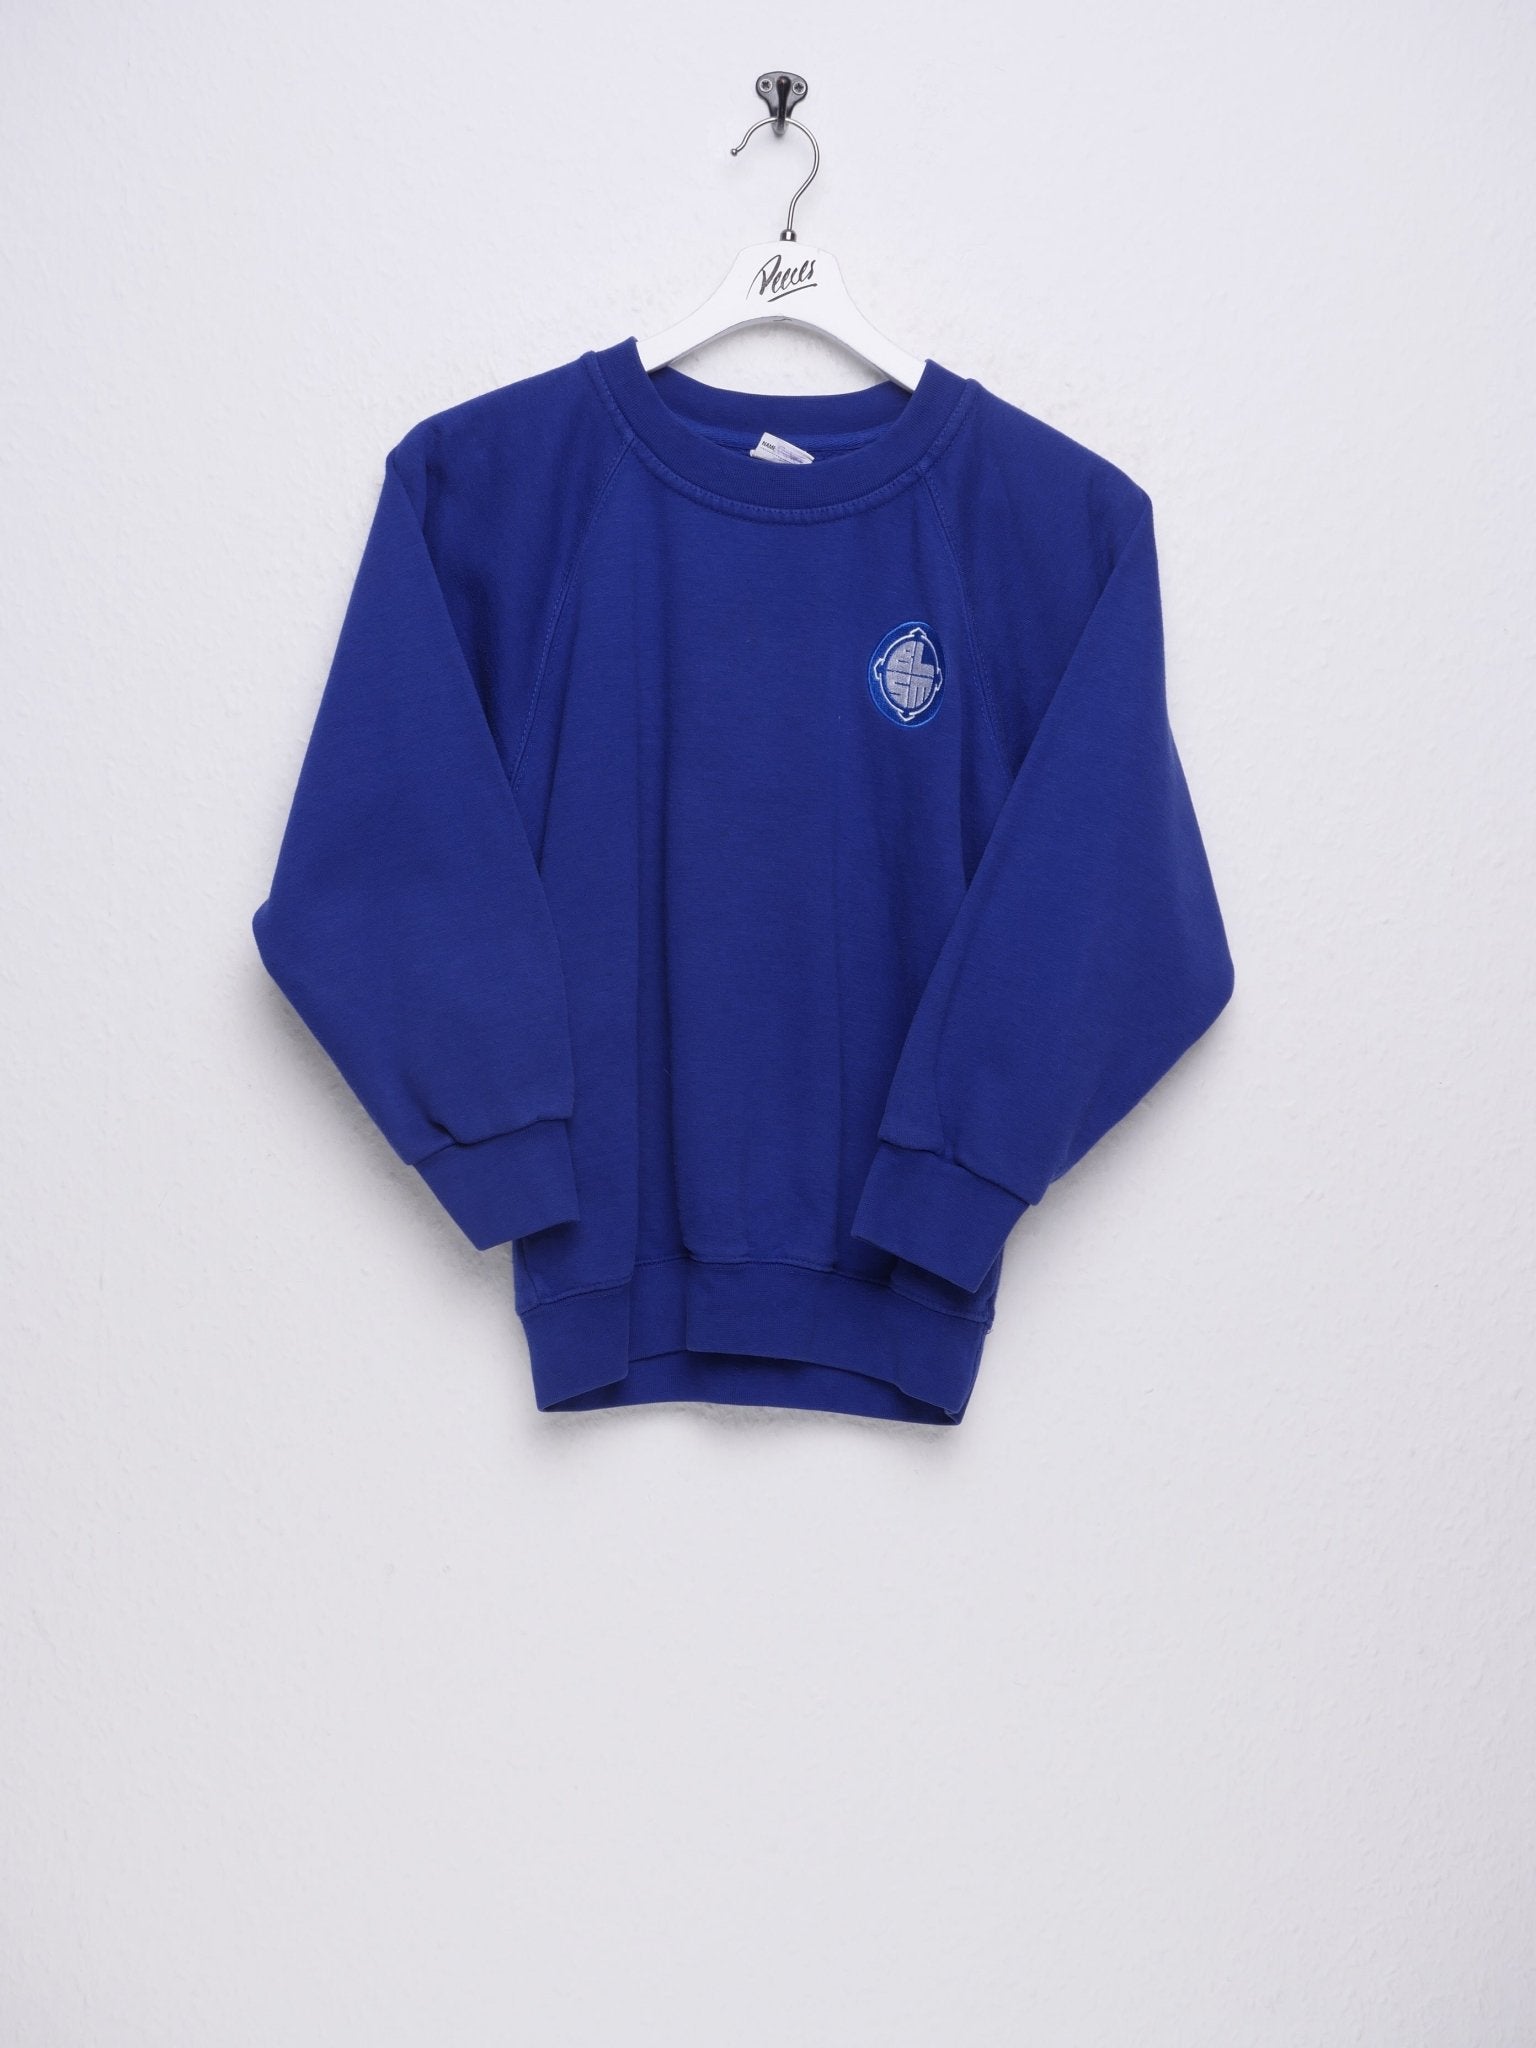 BLSM embroidered Logo Vintage Sweater - Peeces